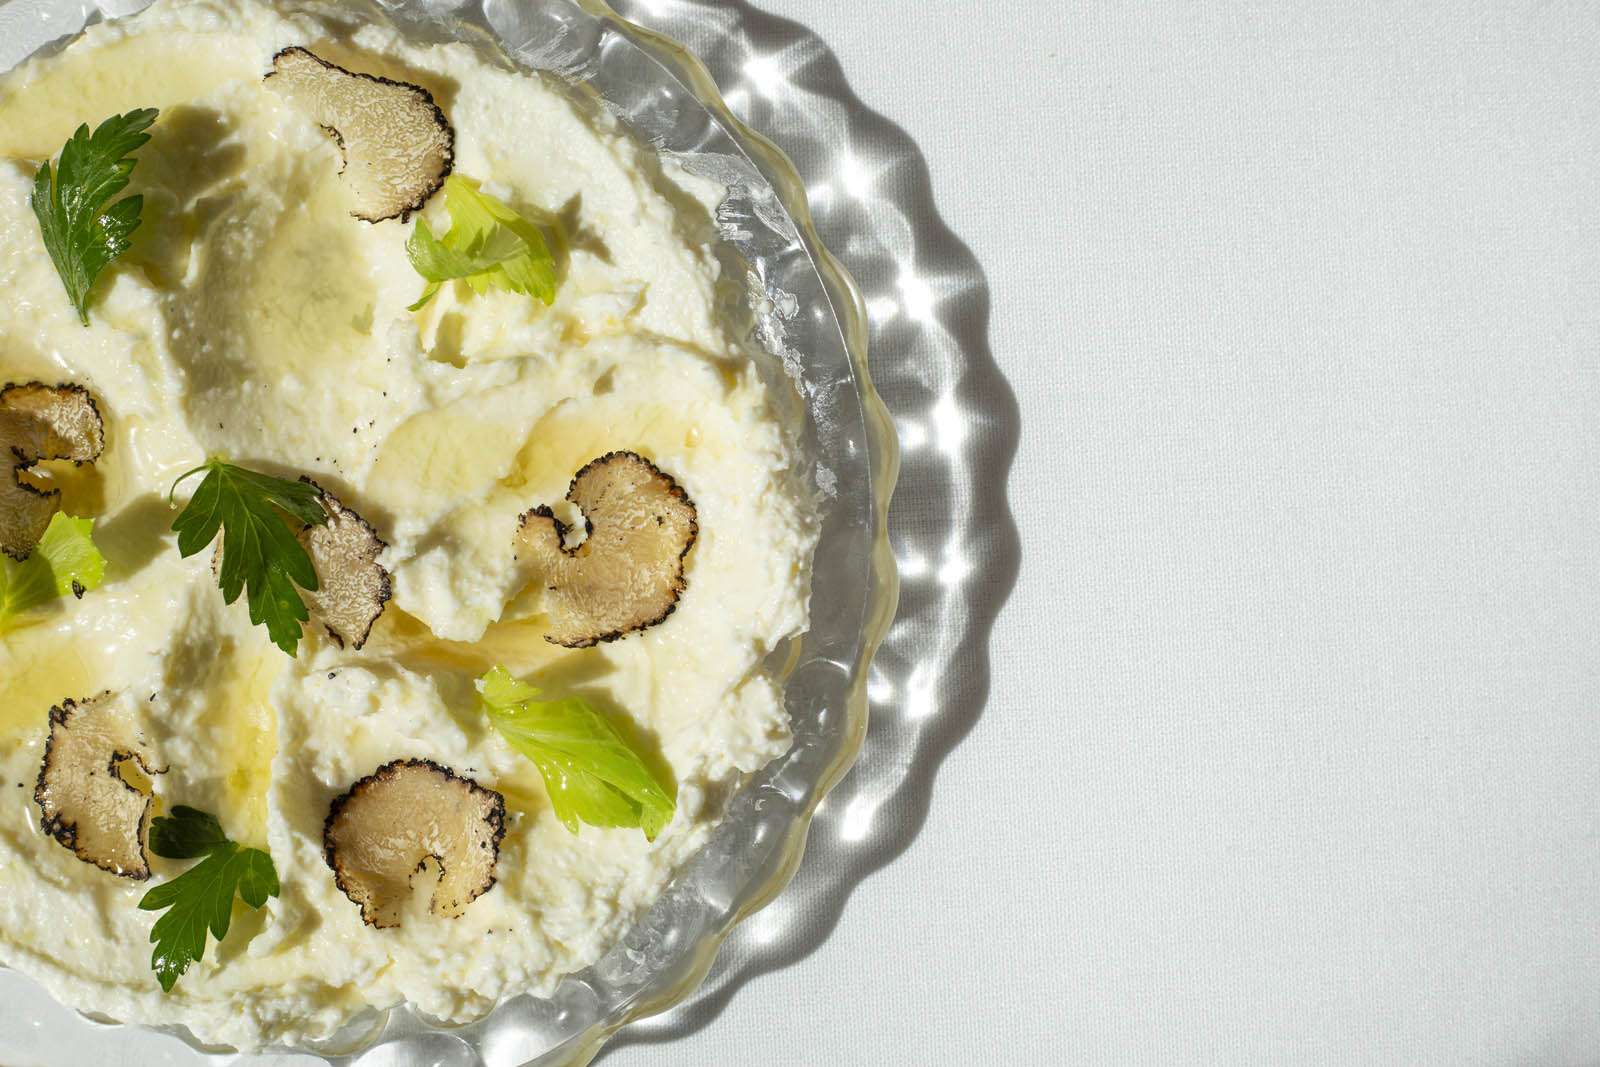 Whipped Ricotta and Truffles served at Cento restaurant in German Village, Columbus, Ohio.